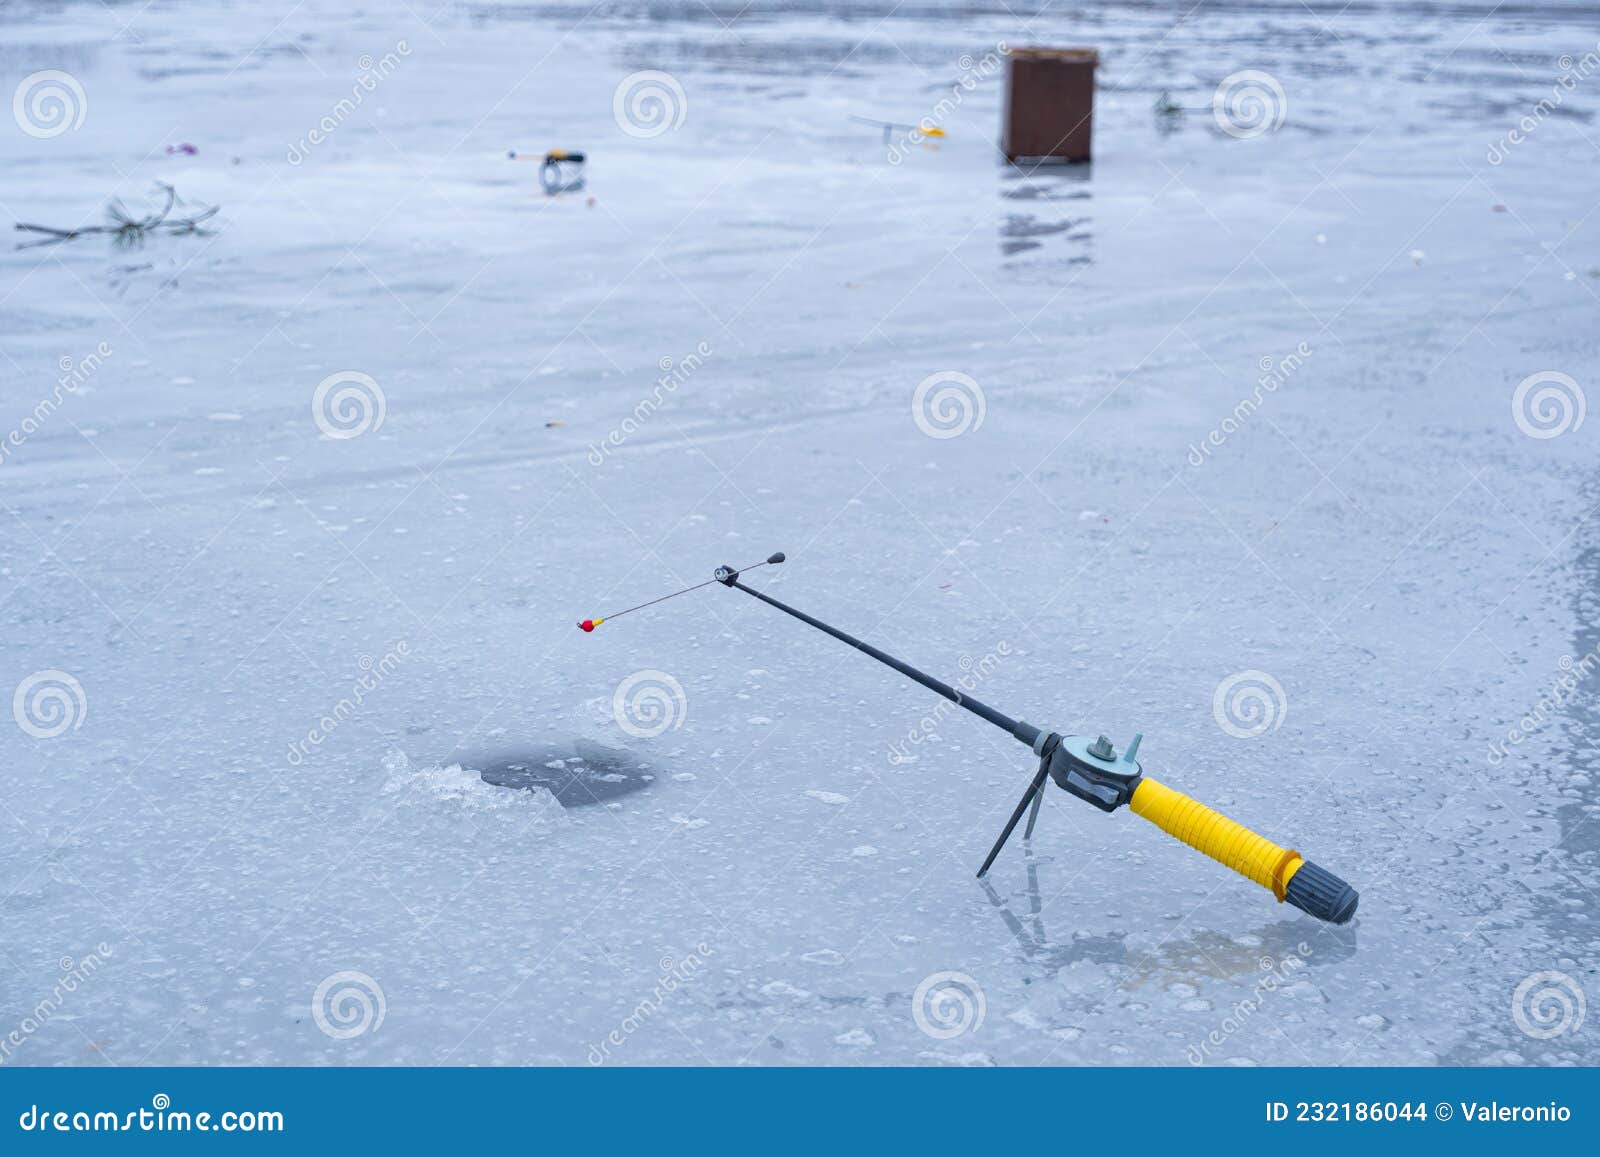 Ice Fishing Rod Ready Waiting for Fish Bite in a Hole on a Narrow